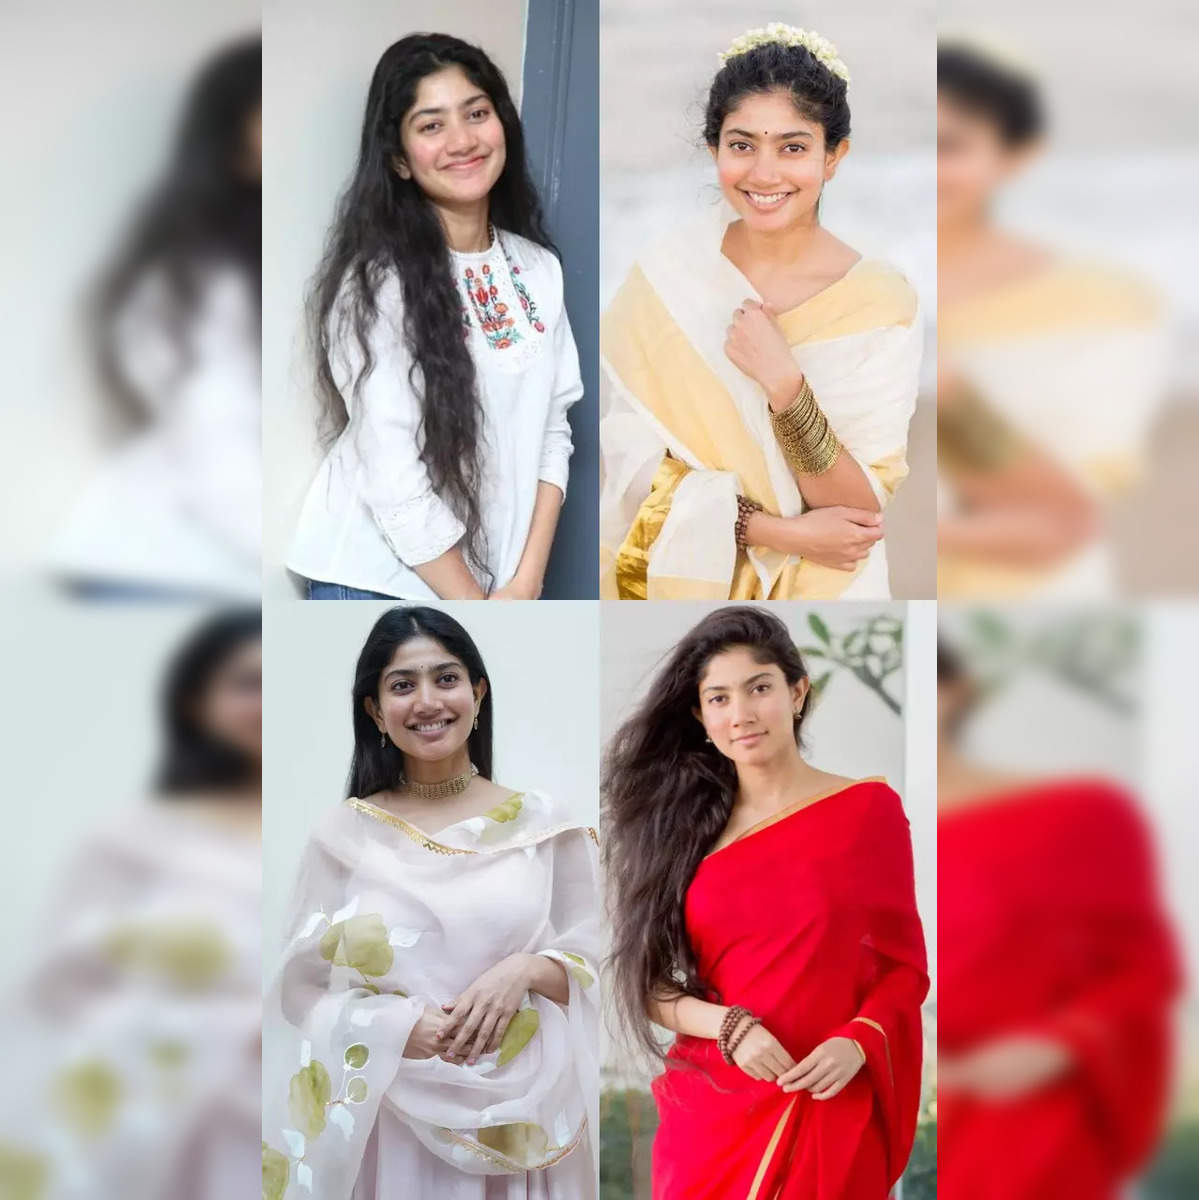 Sai Pallavi Xvideos - Sai Pallavi birthday: Pushpa 2 and more, a look at upcoming films of the  Premam actor - The Economic Times